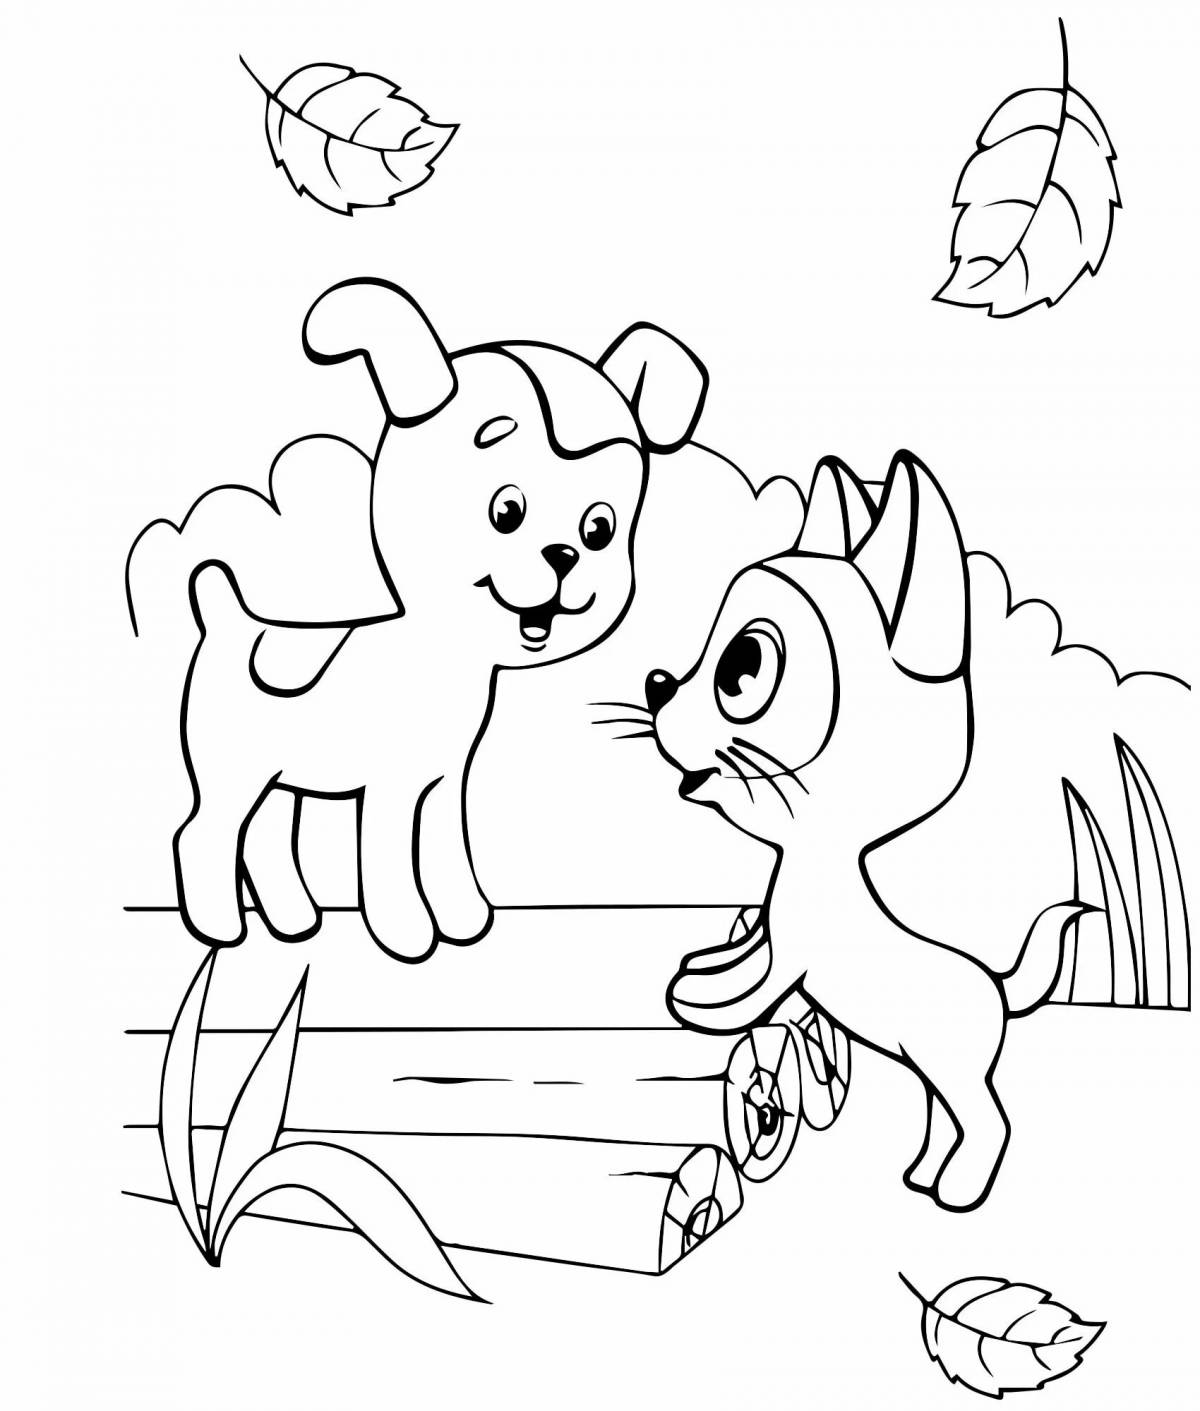 Exotic cat and dog coloring pages for kids